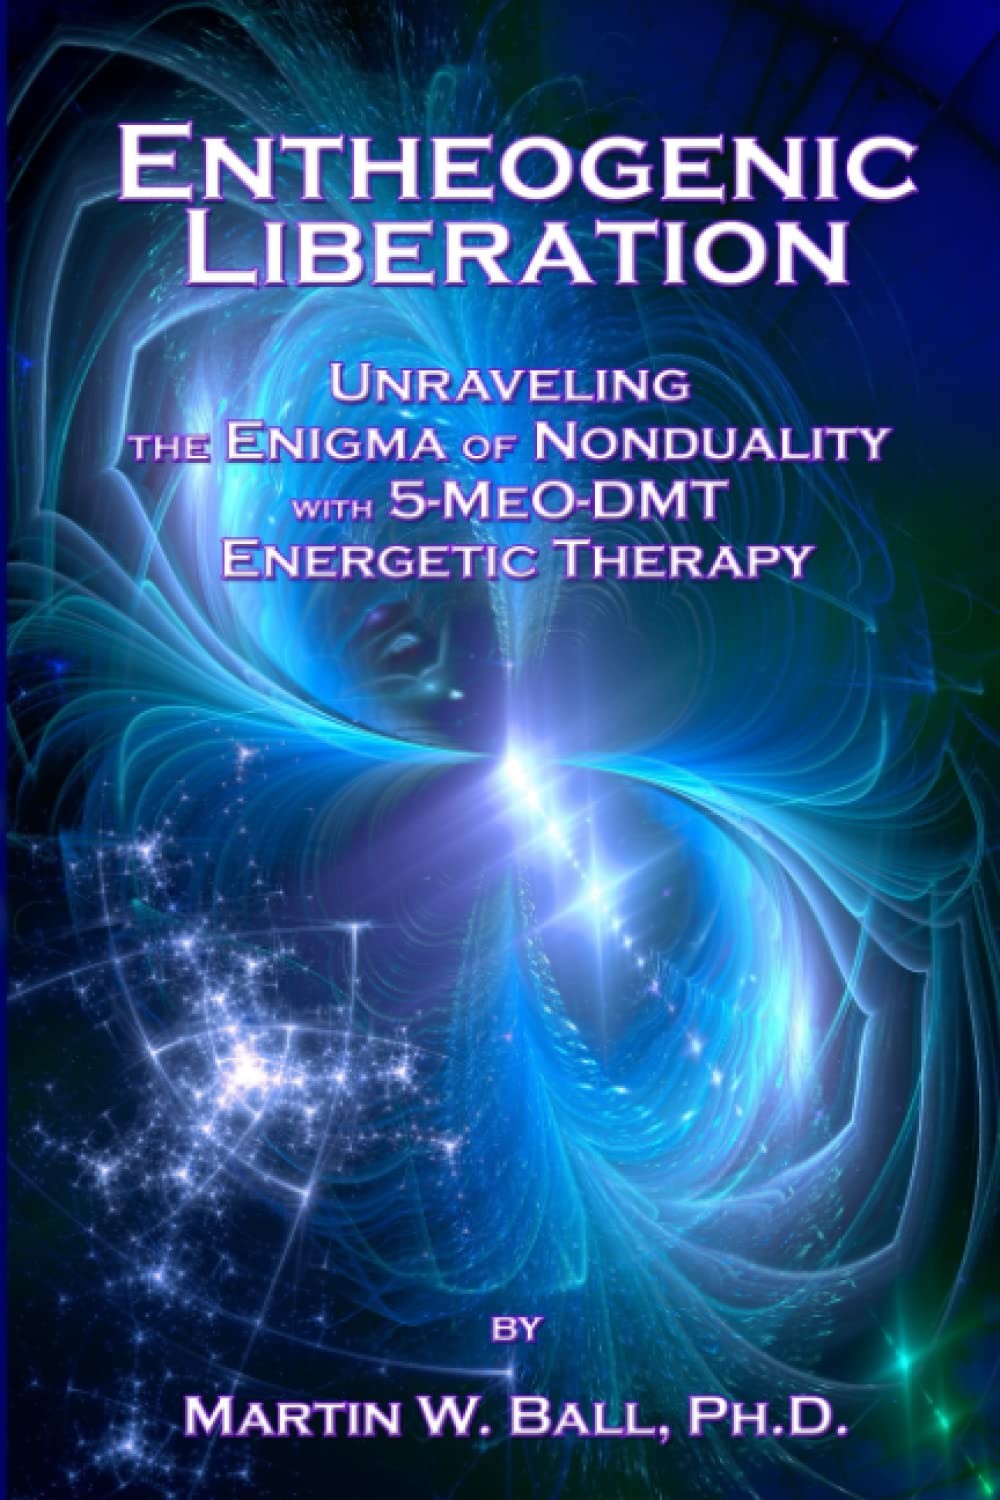 Entheogenic Liberation: Unraveling the Enigma of Nonduality With 5-Meo-Dmt Energetic Therapy